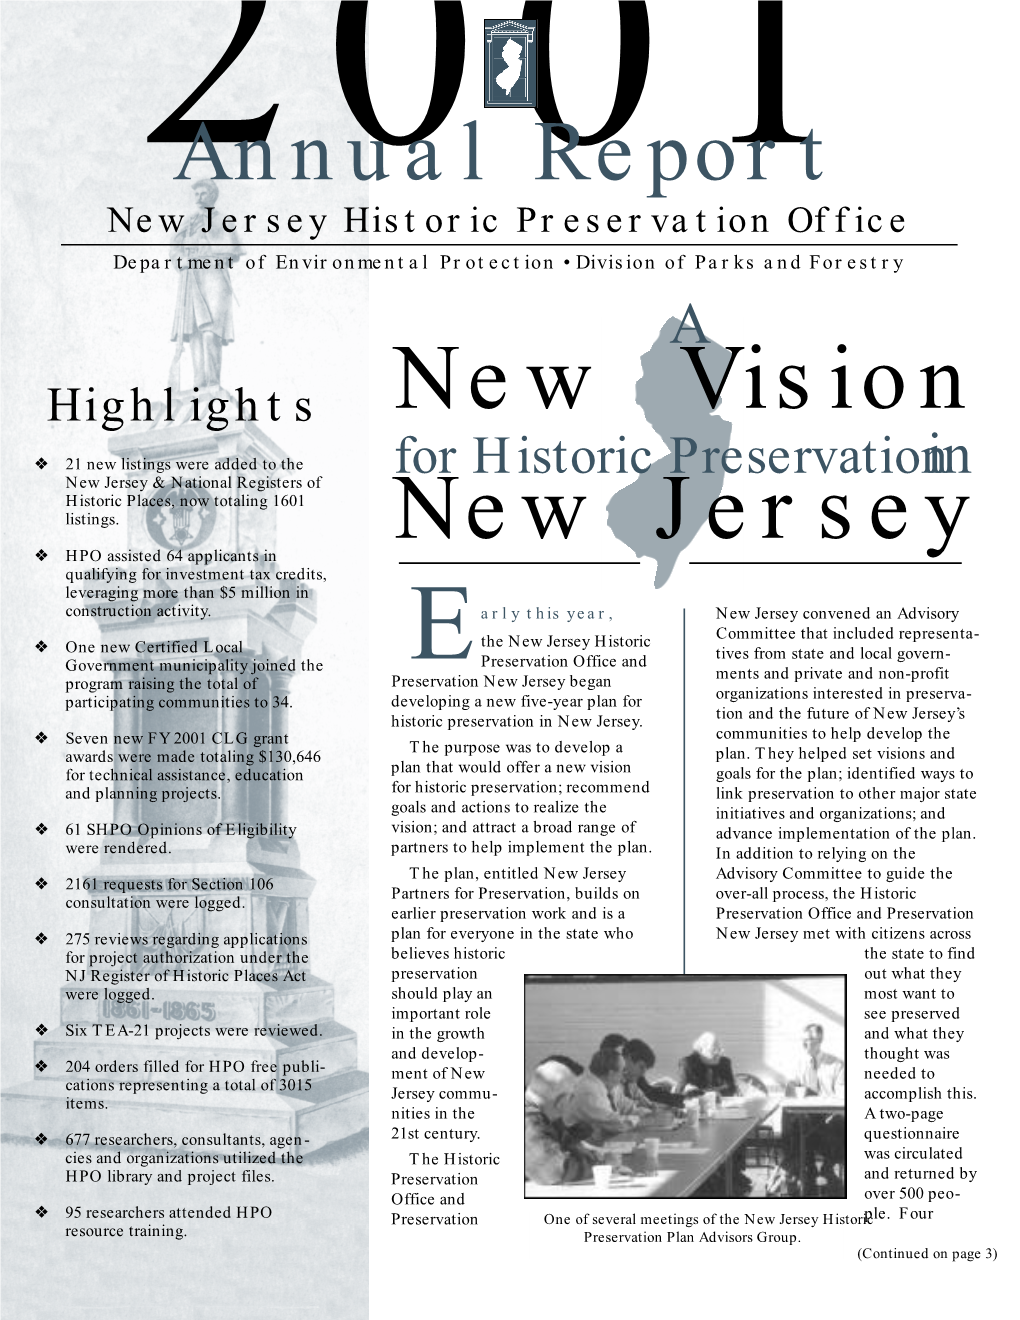 New Vision New Jersey